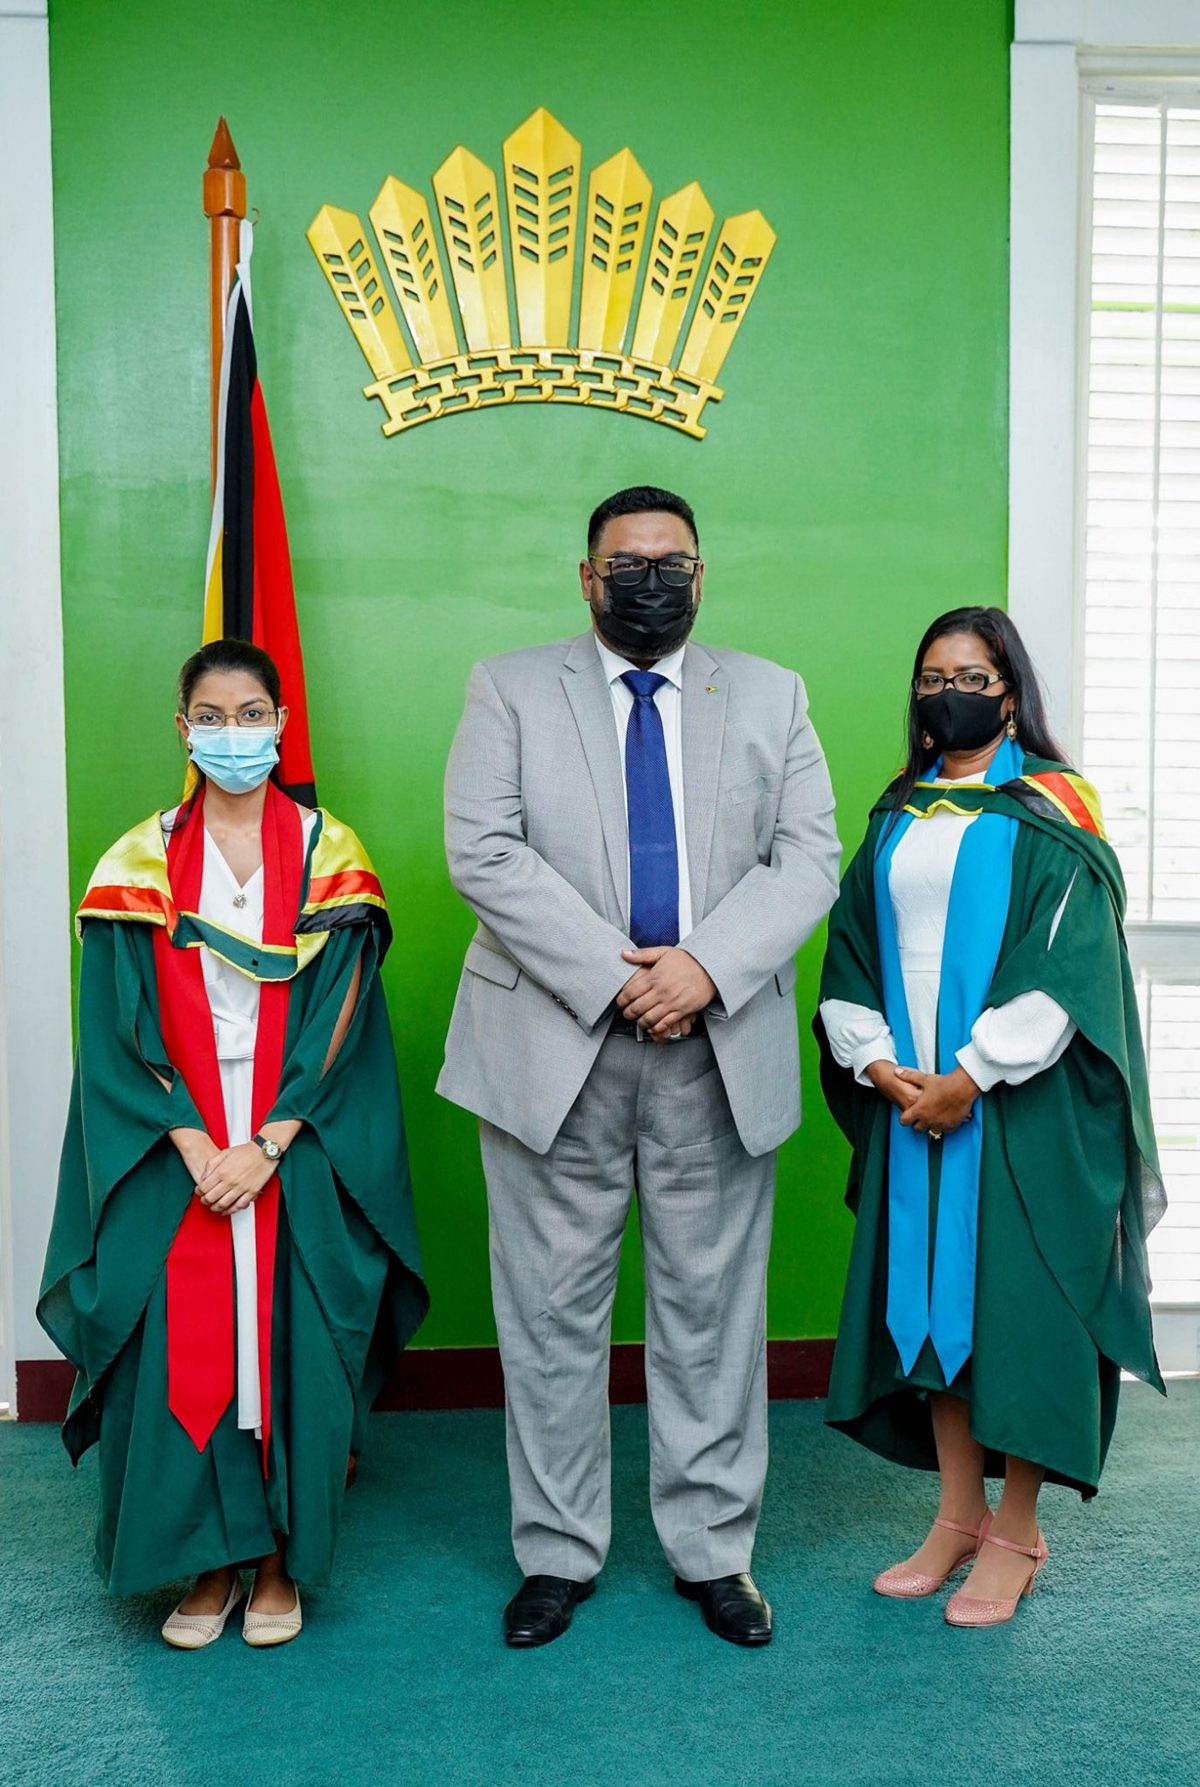 UG Valedictorians: President Irfaan Ali on Friday with the recipients of the 2020 President’s Medal, Deepa Odit (at left) and Savitree Budram. The University of Guyana last evening held the first of five convocation ceremonies for its 2019/2020 graduation class.  Odit, 24, who has completed a Bachelor of Science Degree in Pharmacy, is the Valedictorian of the Turkeyen Campus, while Budram, 36, who completed a Bachelor of Education (Administration) Degree, is the Valedictorian of the university’s Tain Campus. (Office of the President photo)